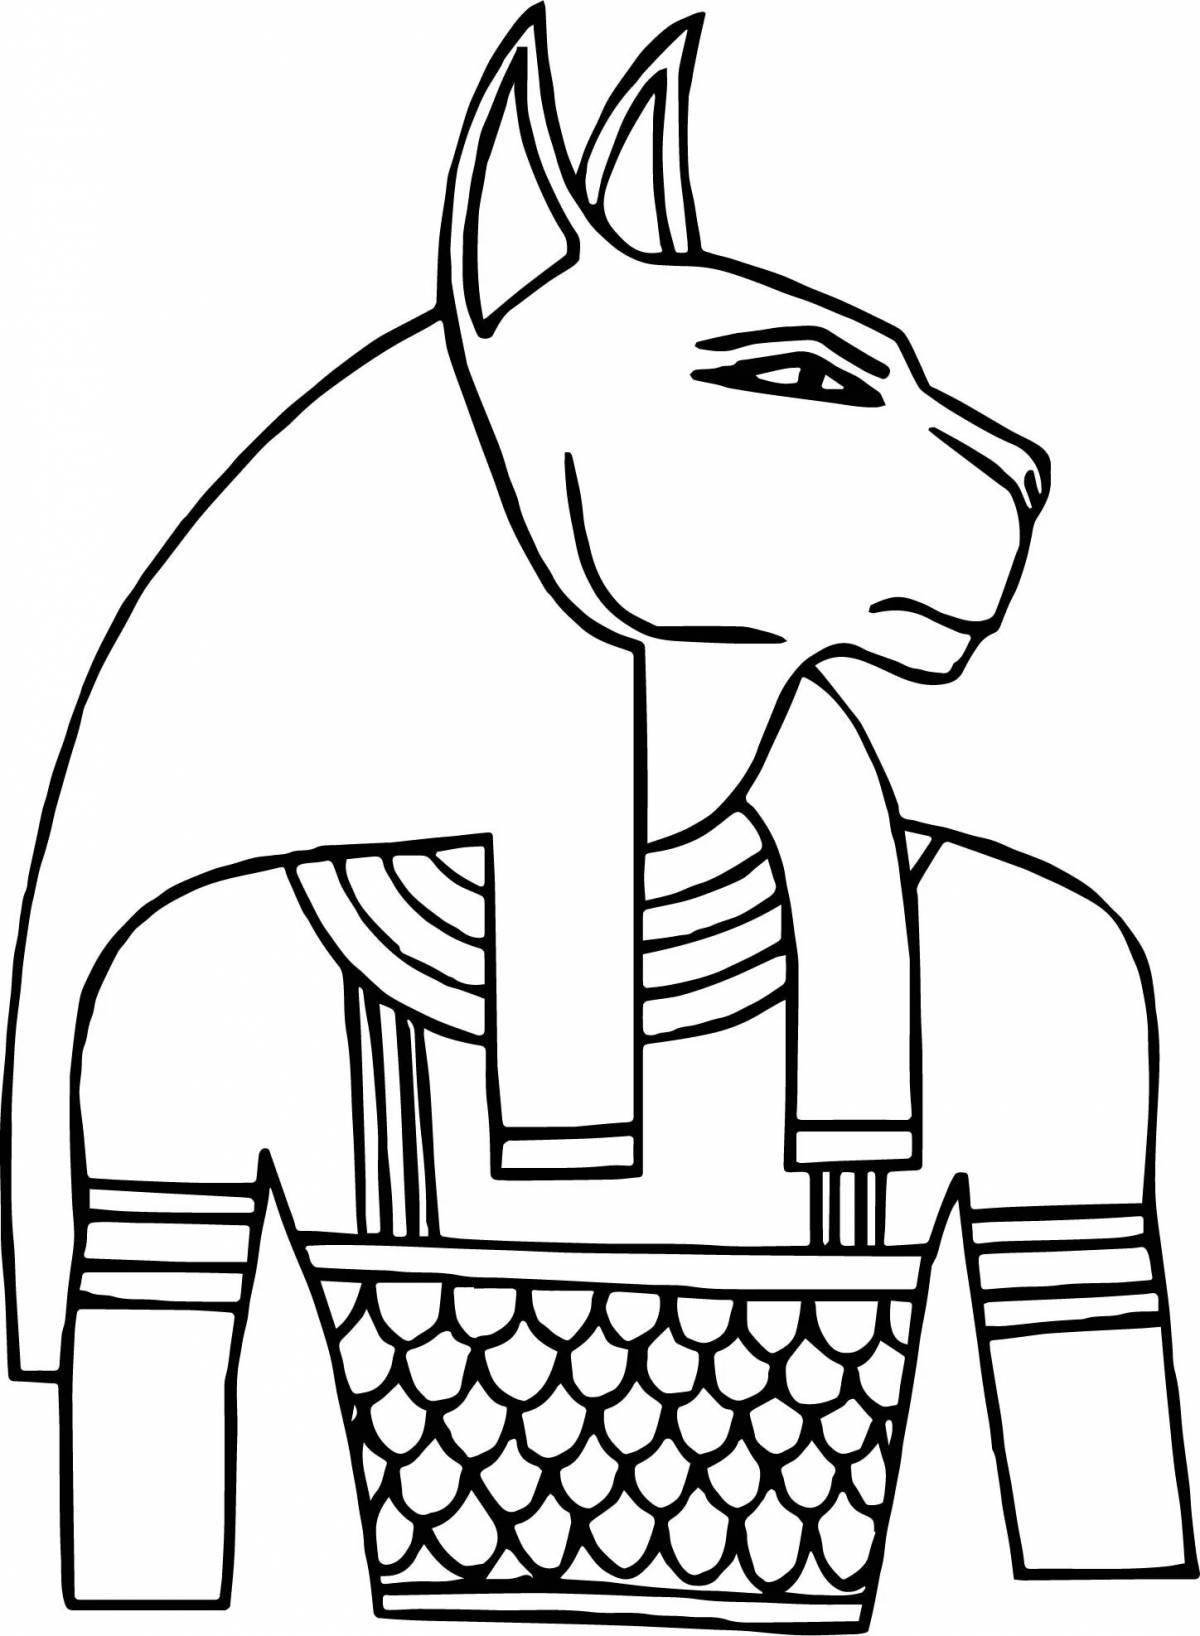 Exalted egyptian gods coloring book